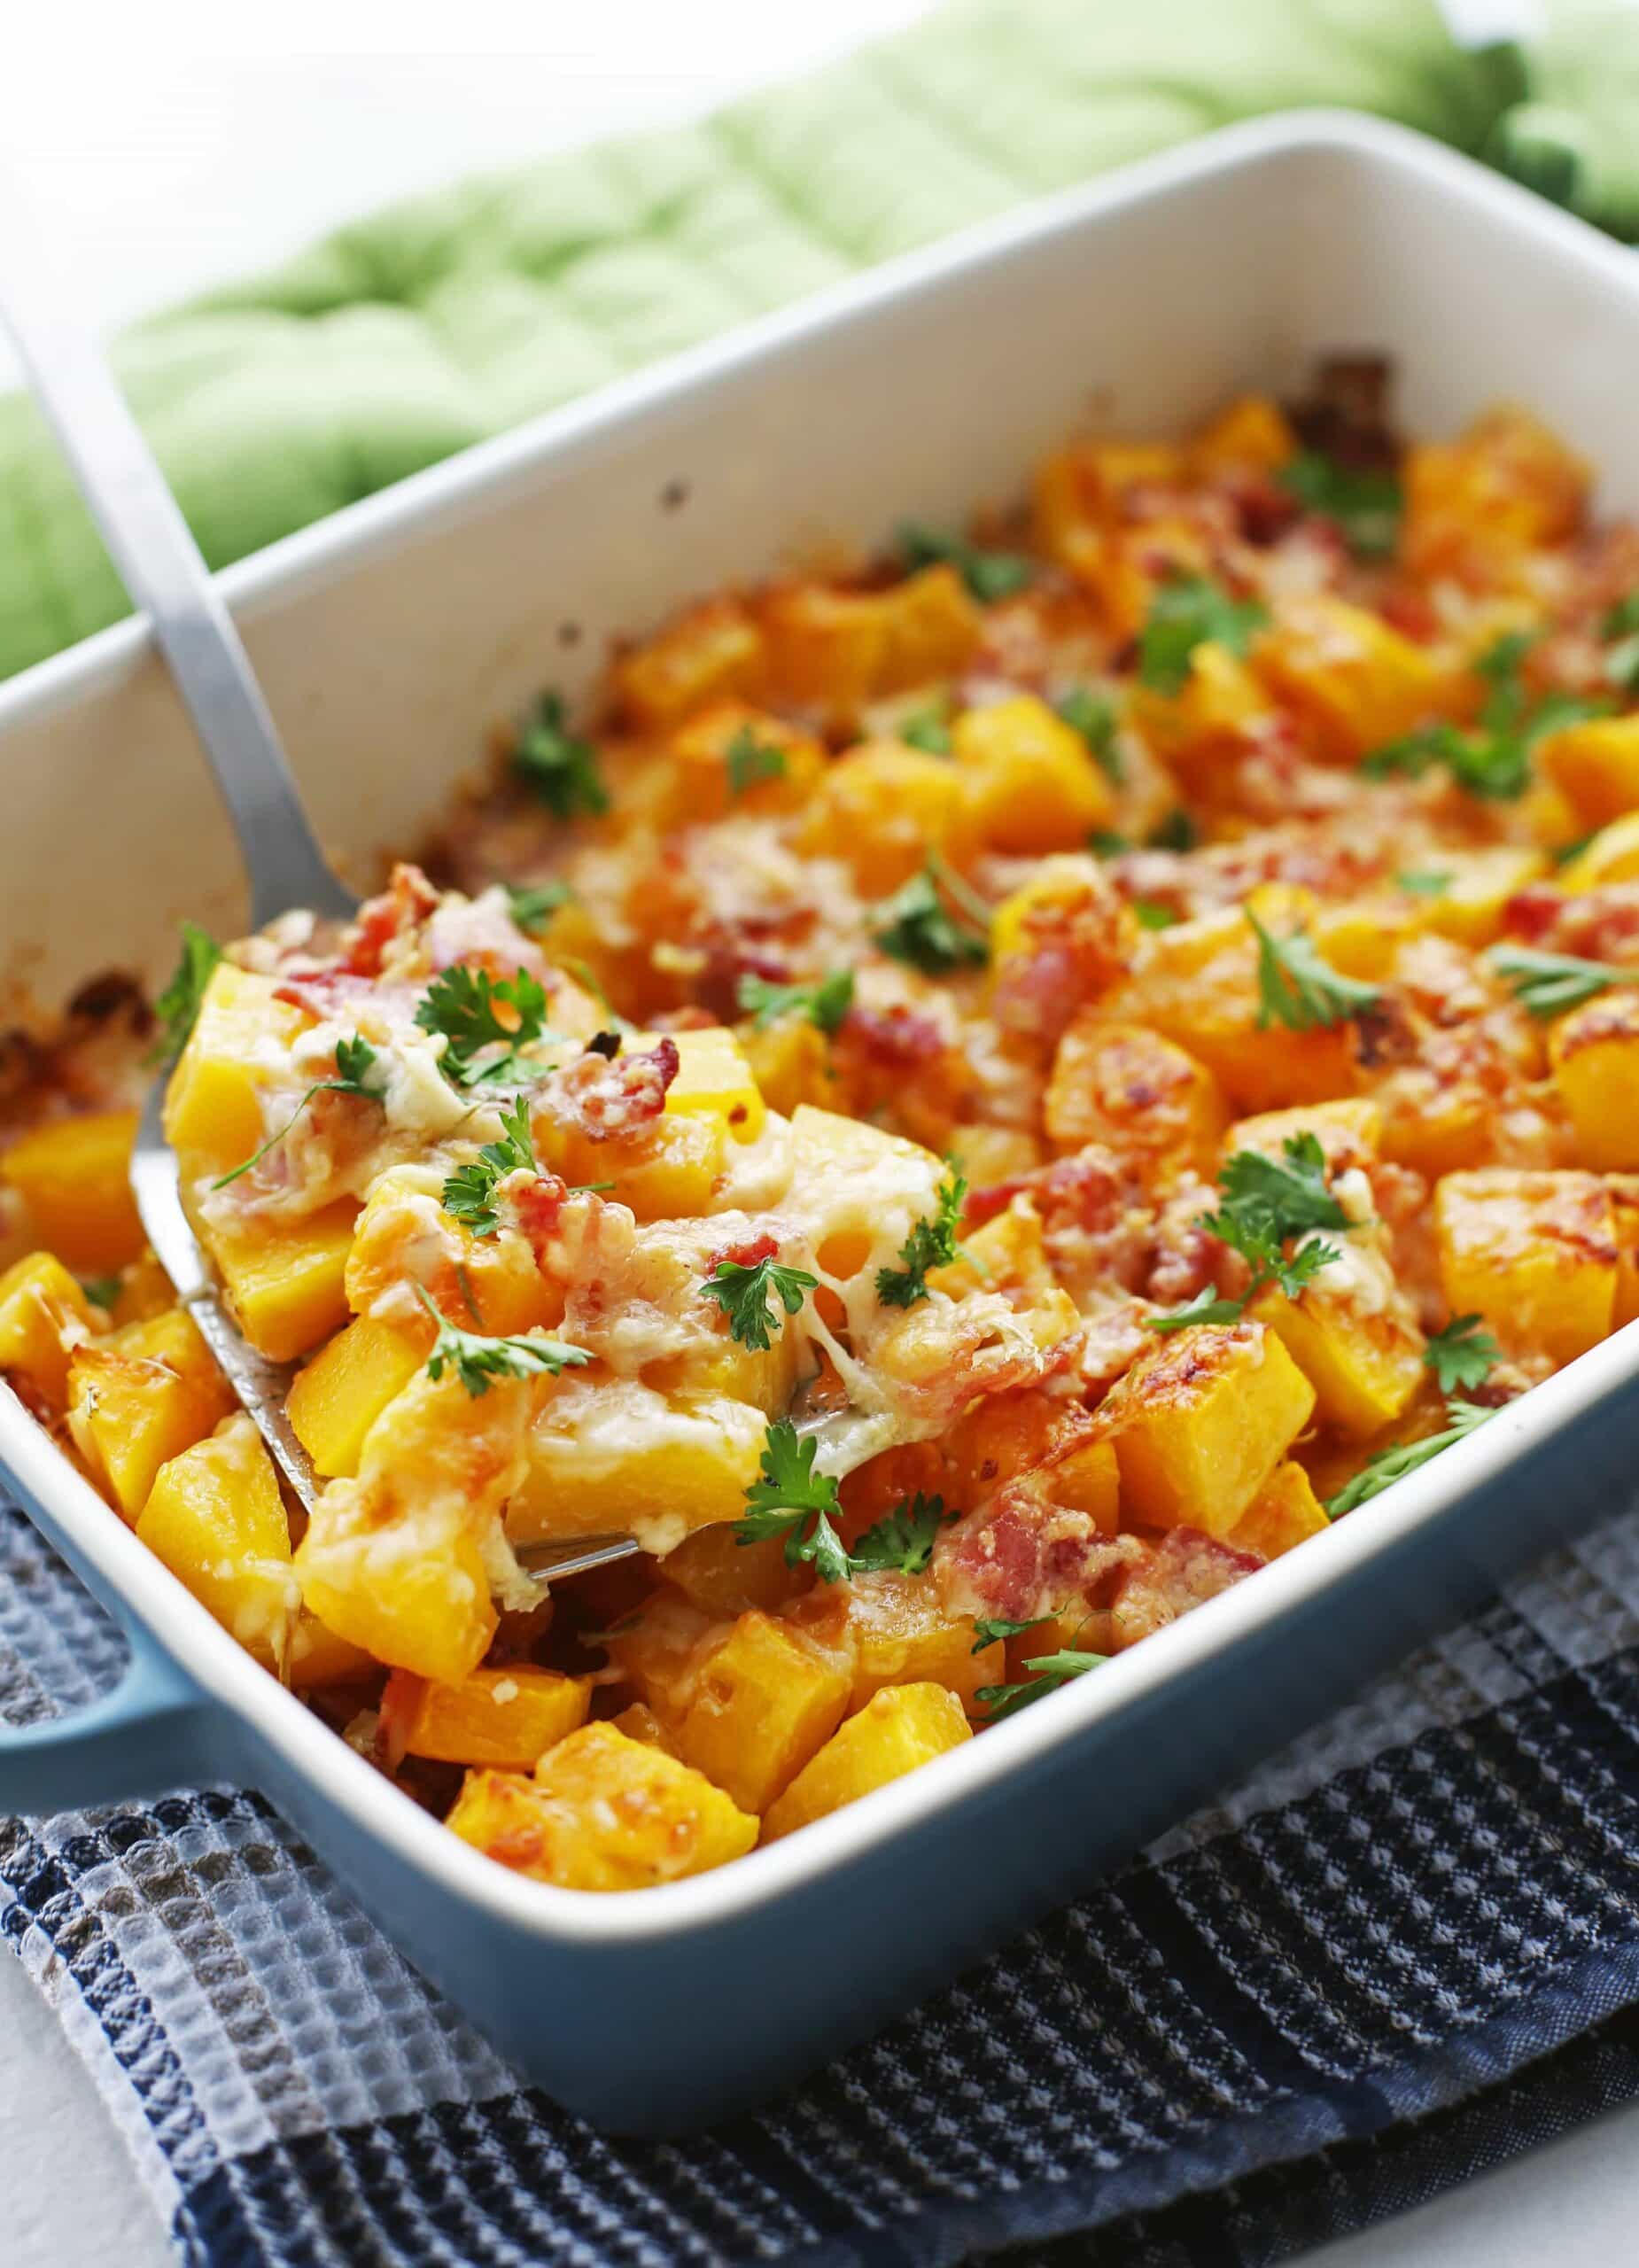 Baked Bacon Cheese Butternut Squash via Yay for Food